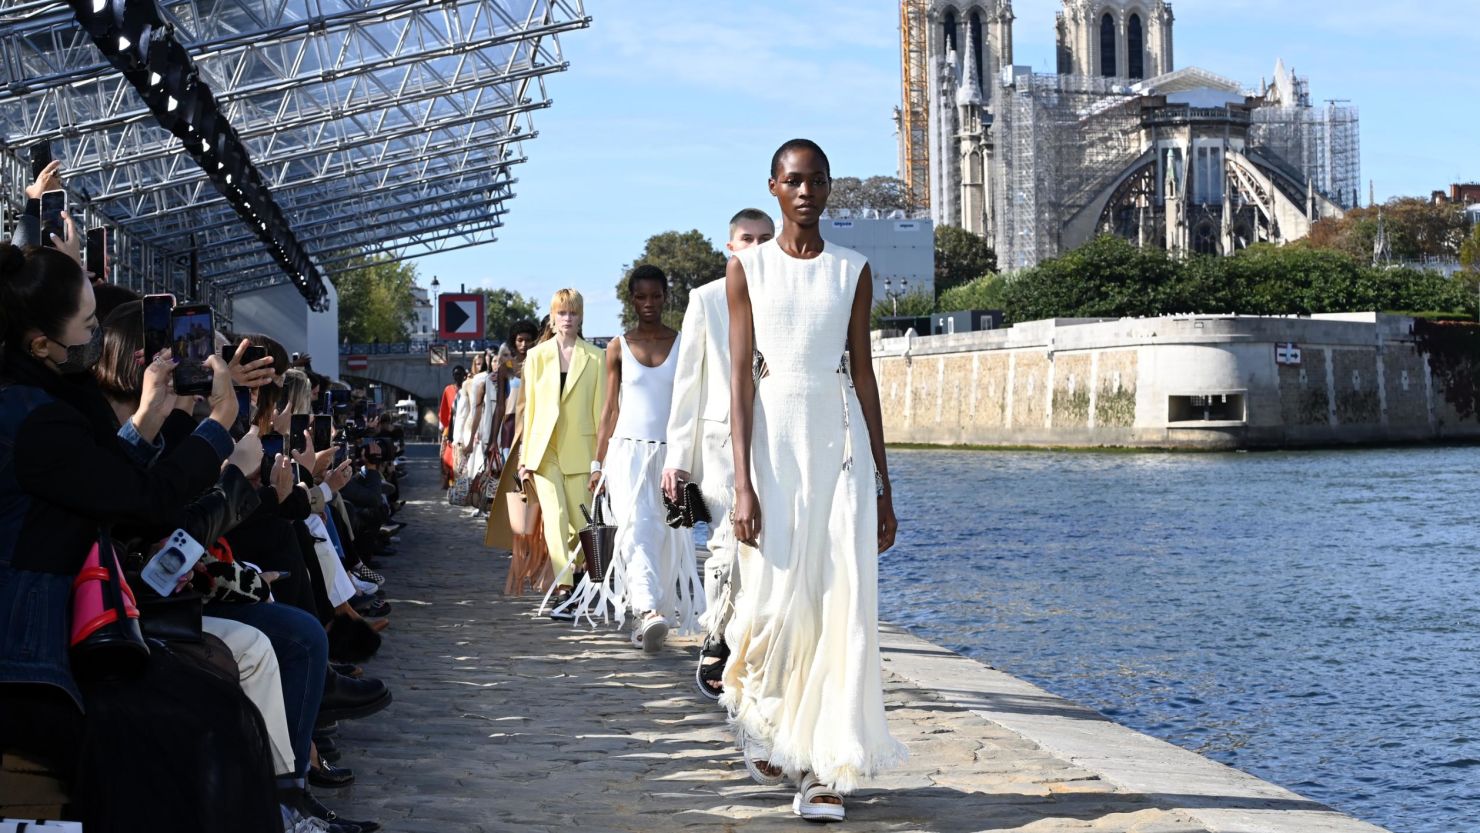 PARIS, FRANCE - SEPTEMBER 30: (EDITORIAL USE ONLY - For Non-Editorial use please seek approval from Fashion House) Models walk the runway during the Chloe  Womenswear Spring/Summer 2022 show as part of Paris Fashion Week on September 30, 2021 in Paris, France. (Photo by Pascal Le Segretain/Getty Images)